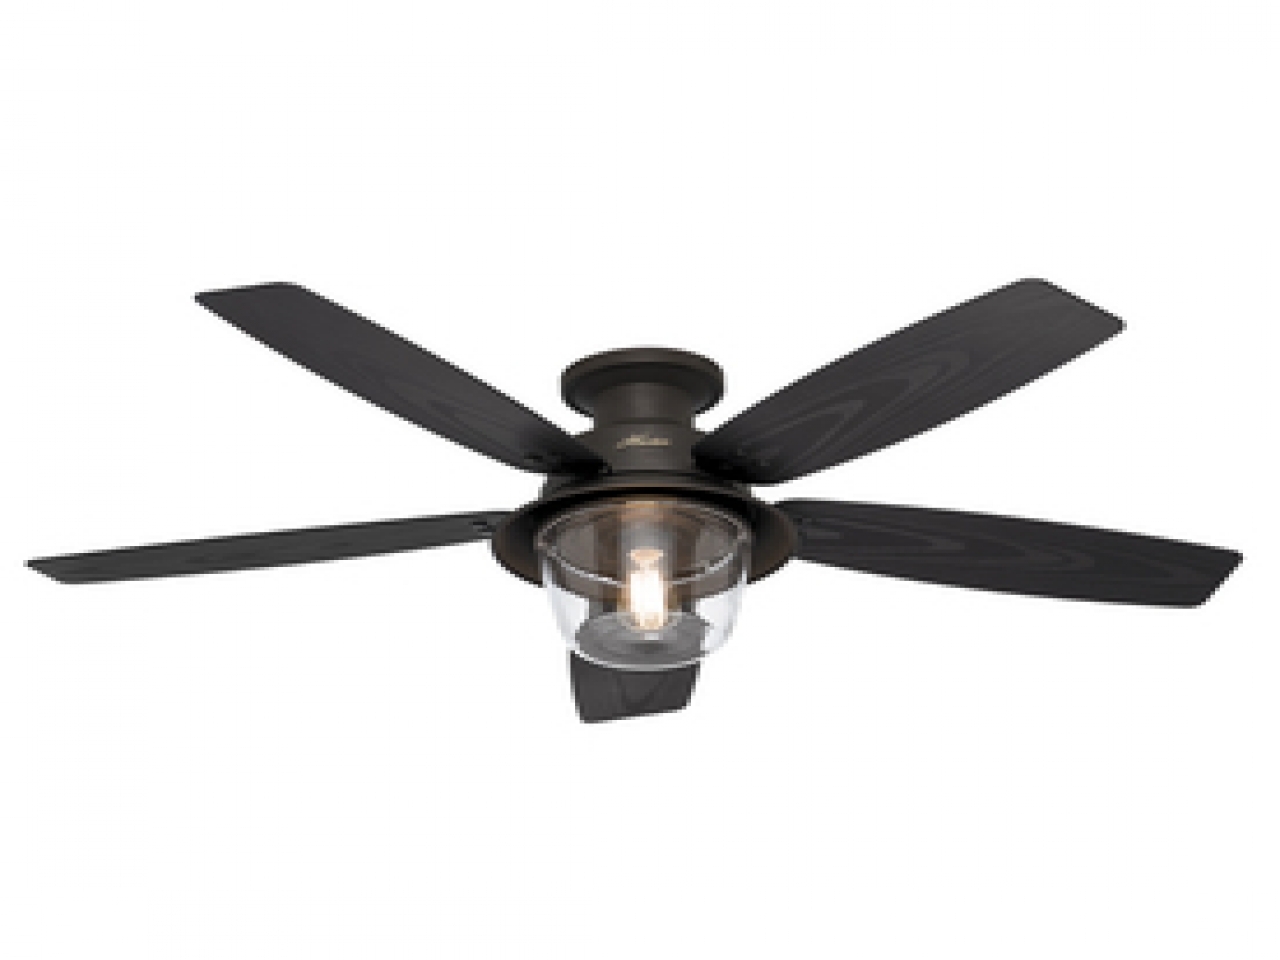 Outdoor Ceiling Fan With Light Flush Mount1280 X 960